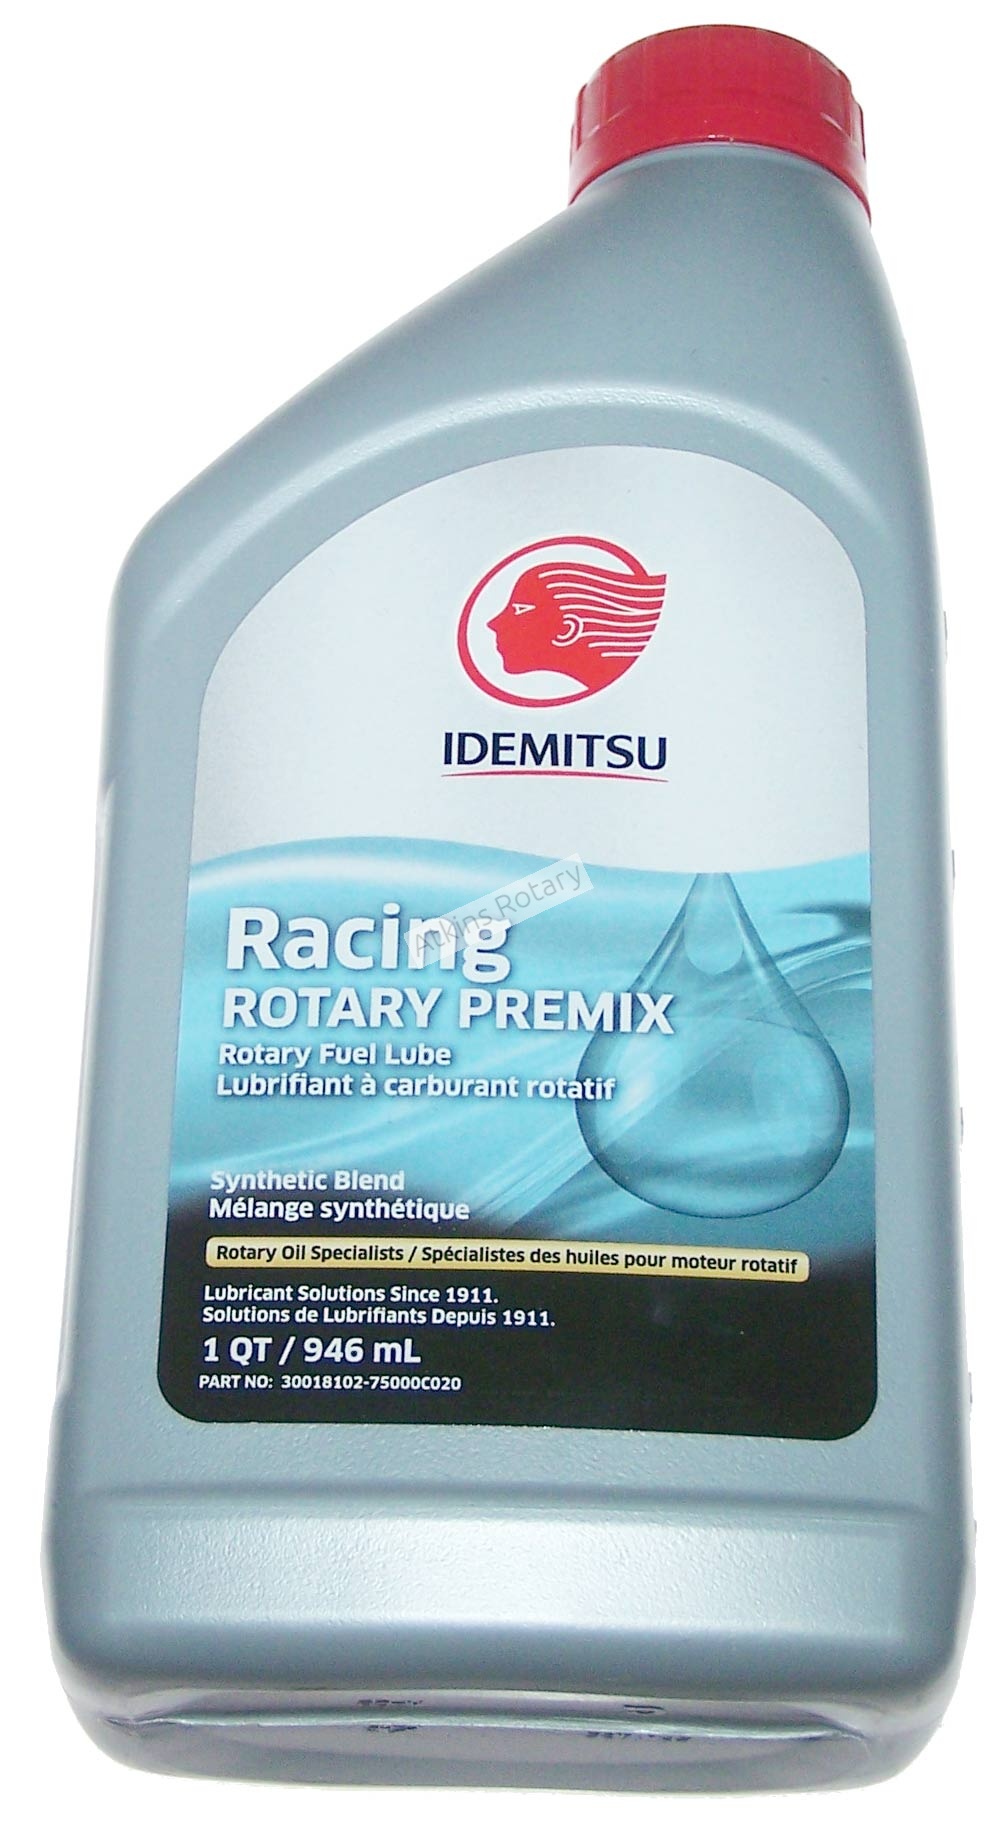 Idemitsu Full Synthetic Rotary Engine Pre-Mix (2206-042A)